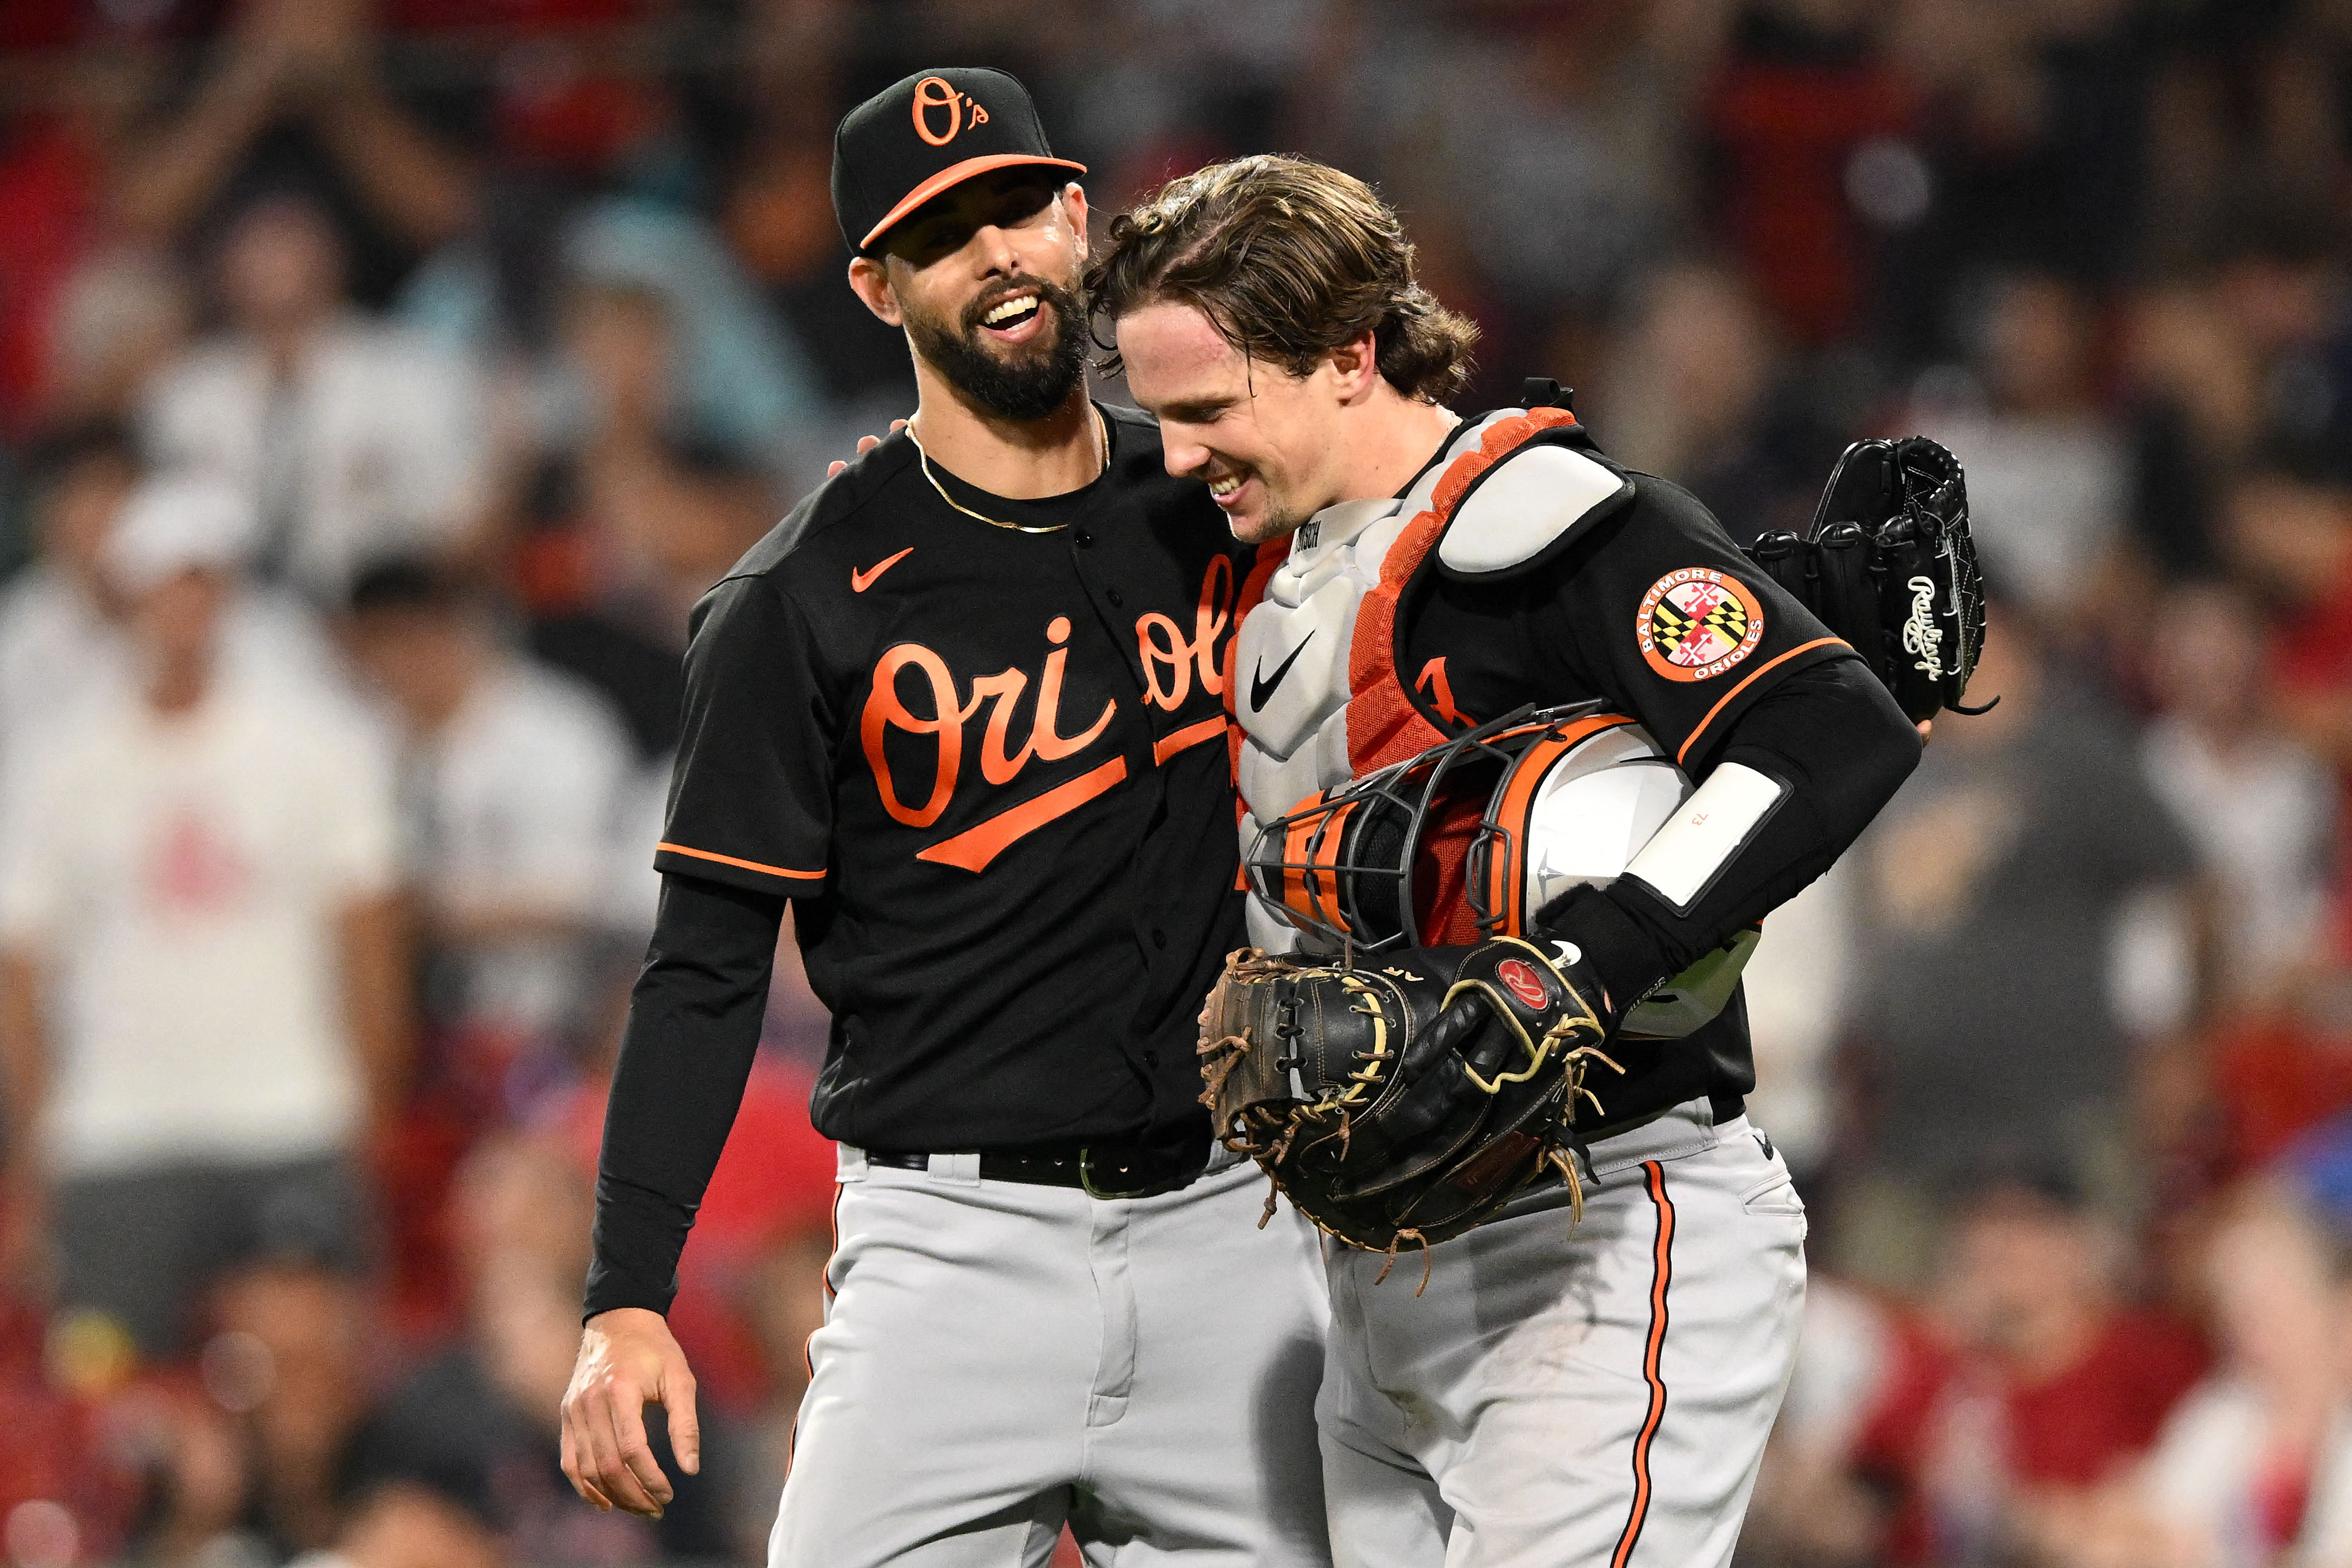 Orioles overpower Red Sox for sixth consecutive win